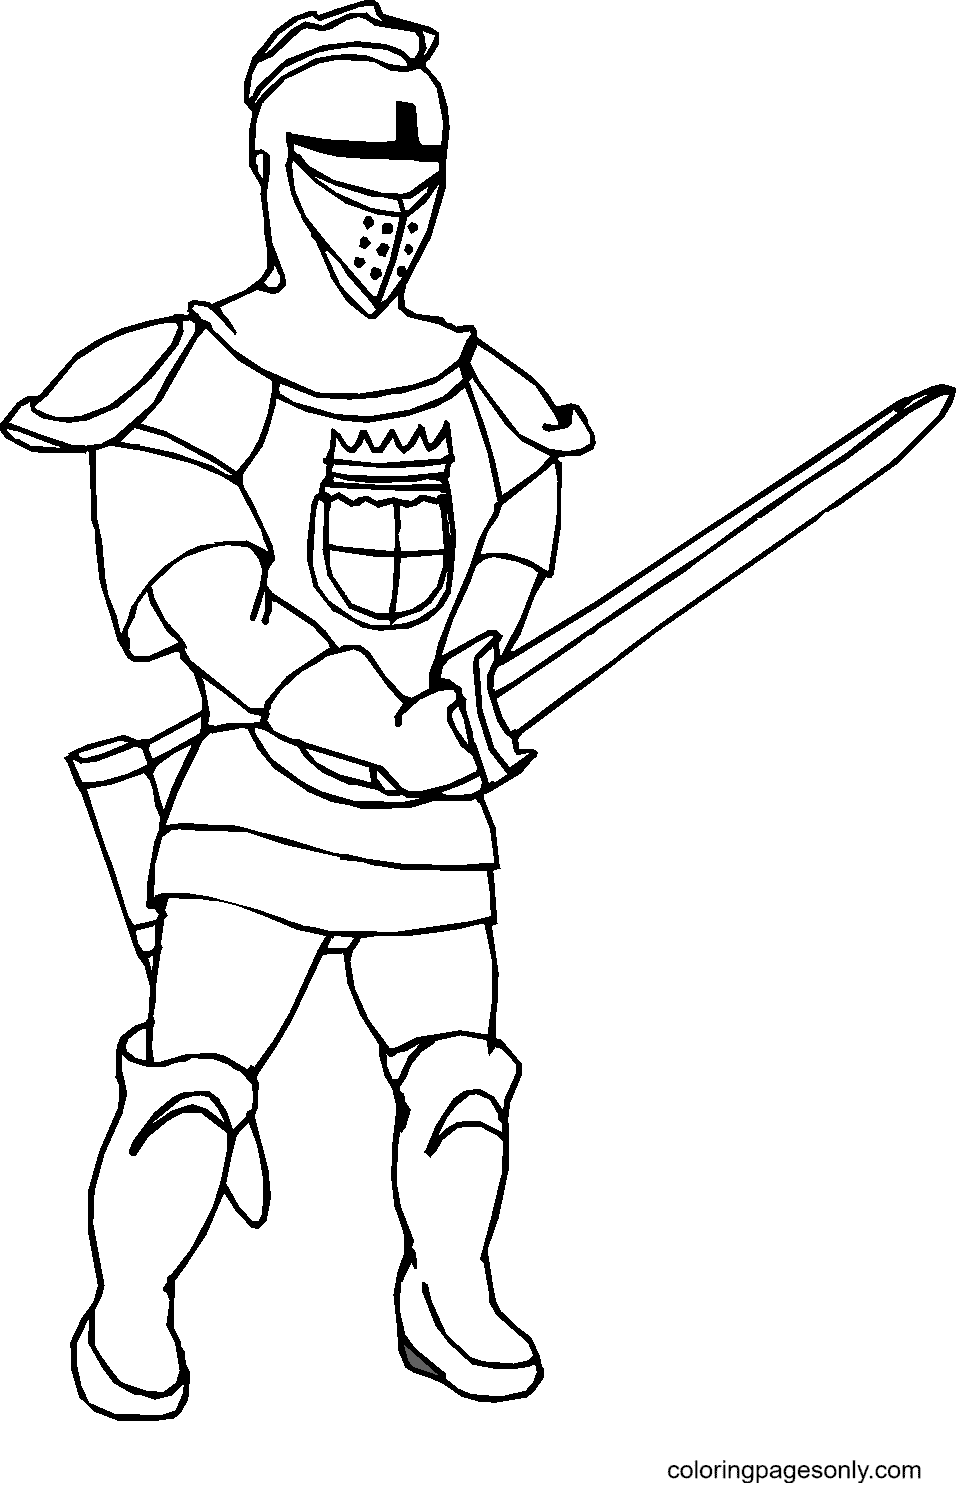 Knight Coloring Pages Printable for Free Download